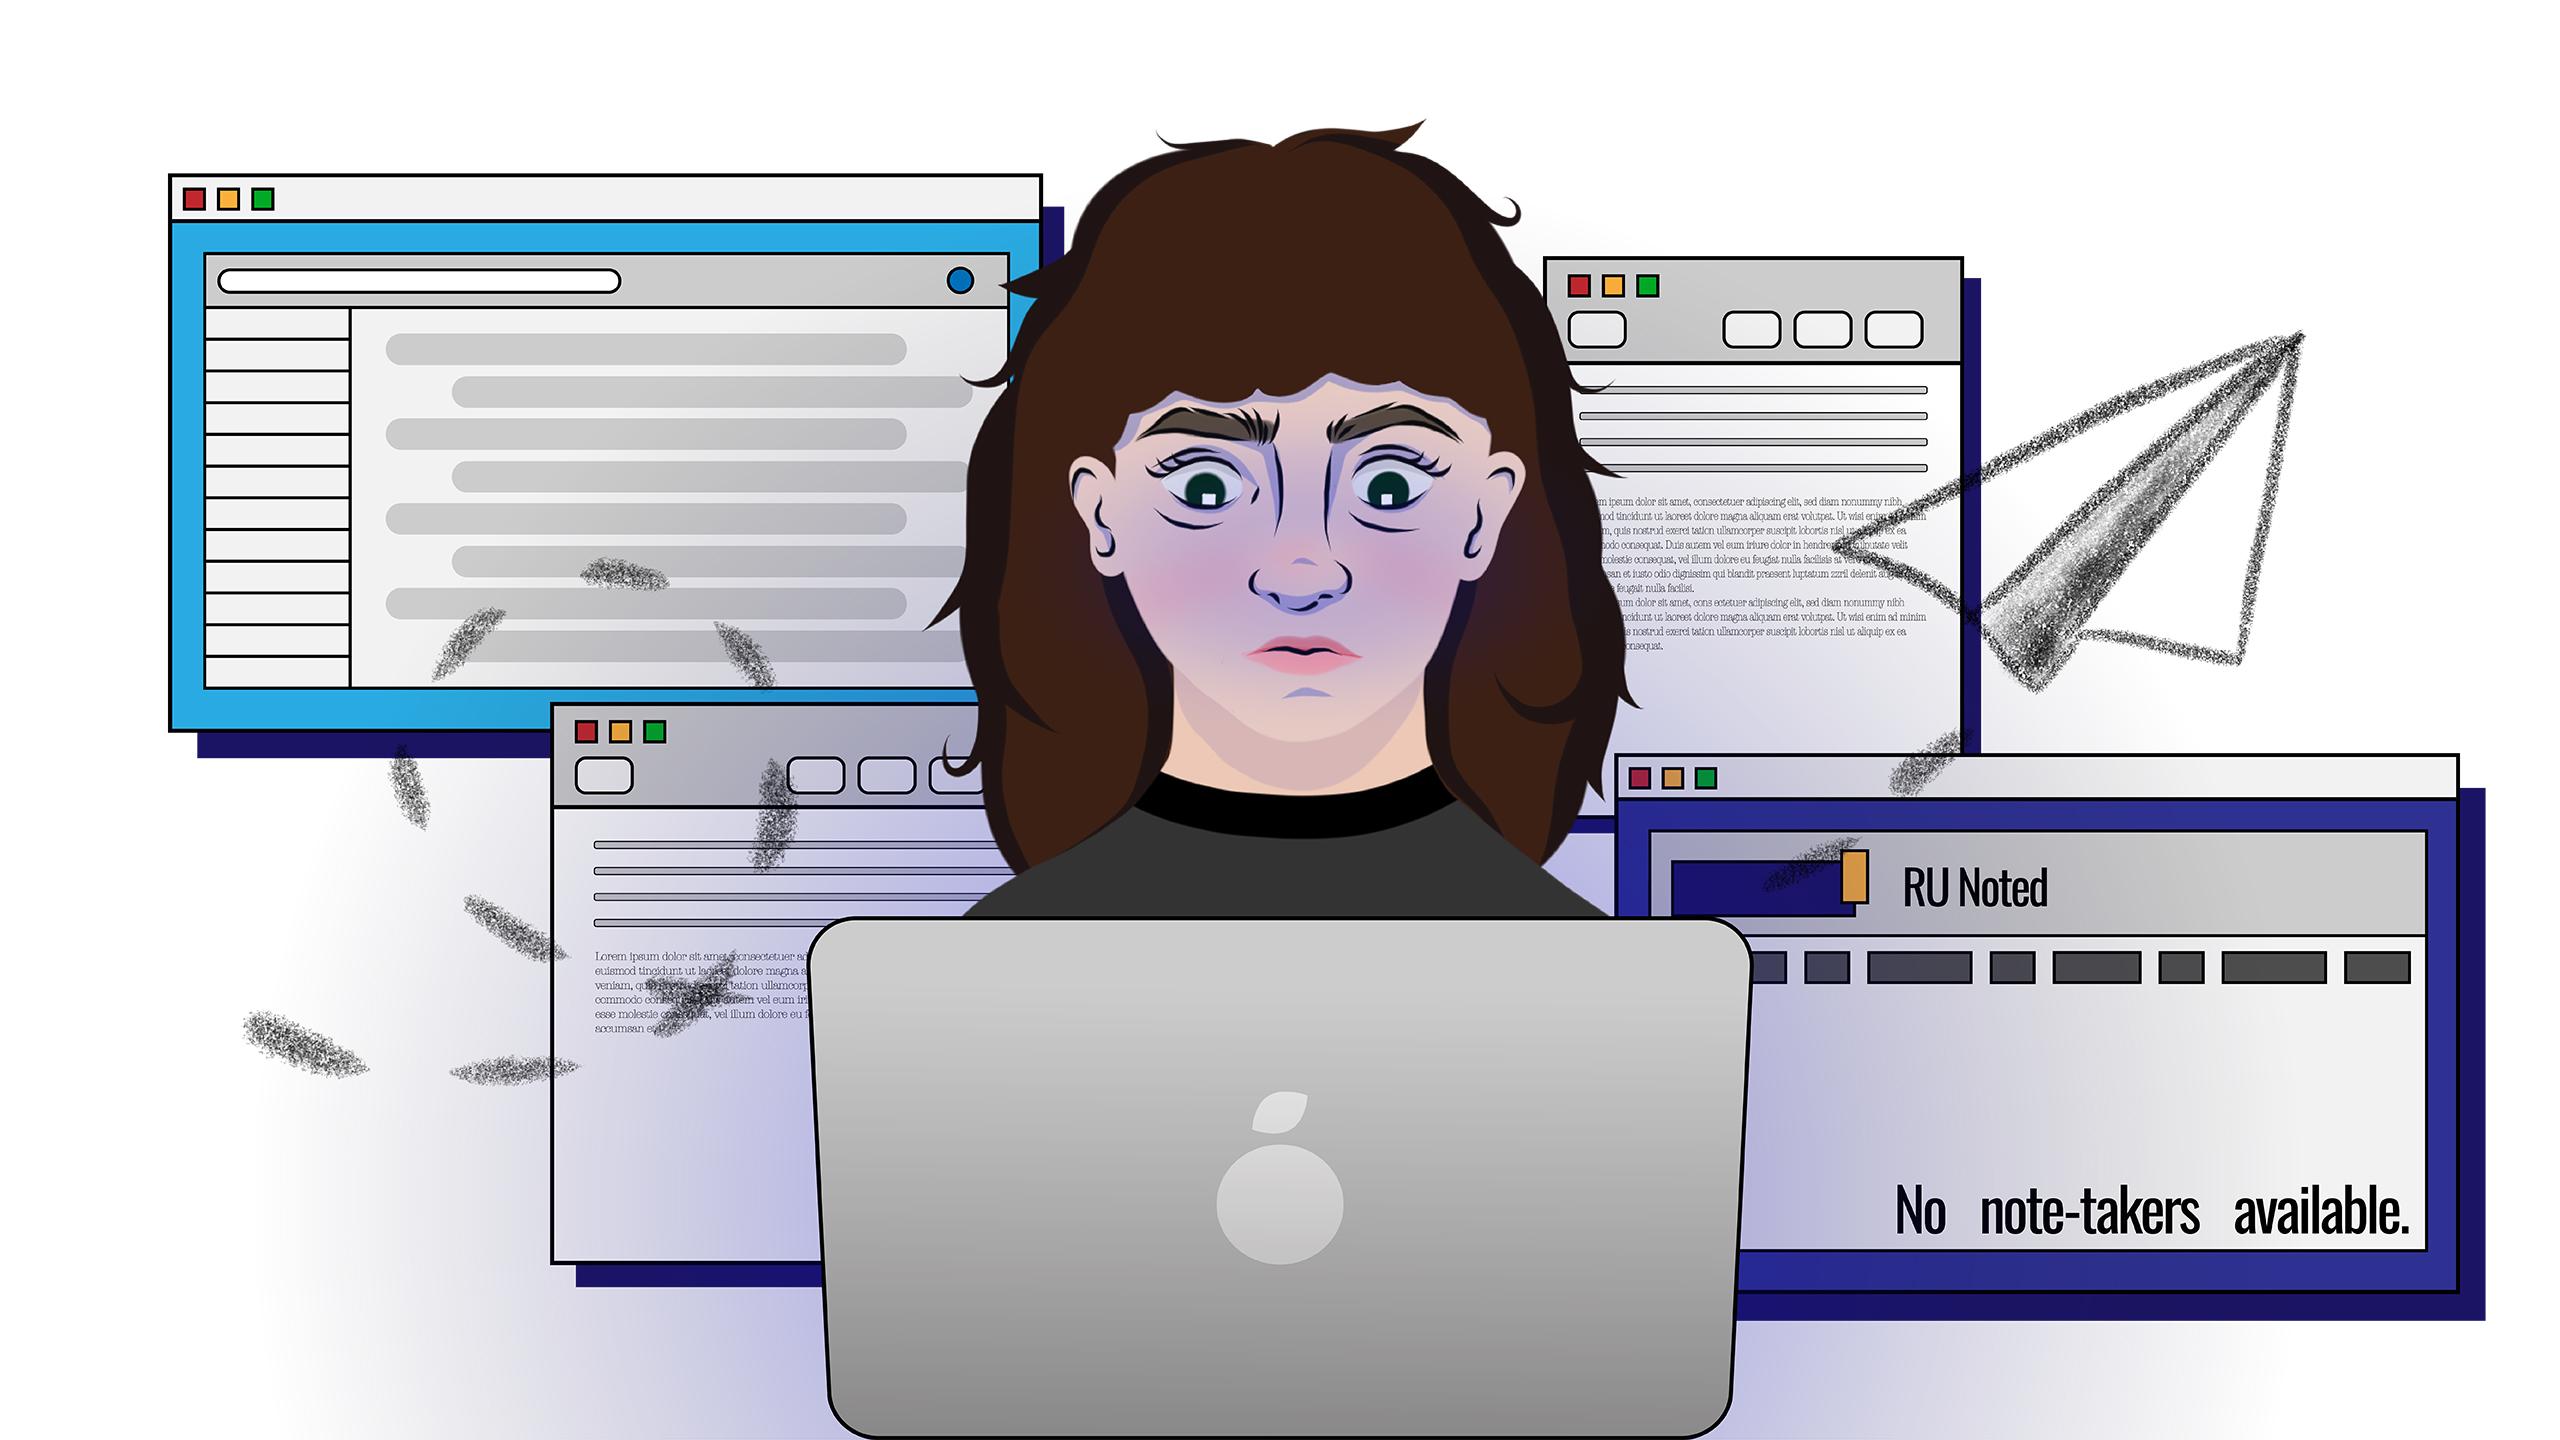 Illustration of a tired student who's face is illuminated by her laptop screen. She is surrounded by internet browser windows with emails, an inbox, and an RU Noted website that says "no note-takers available."